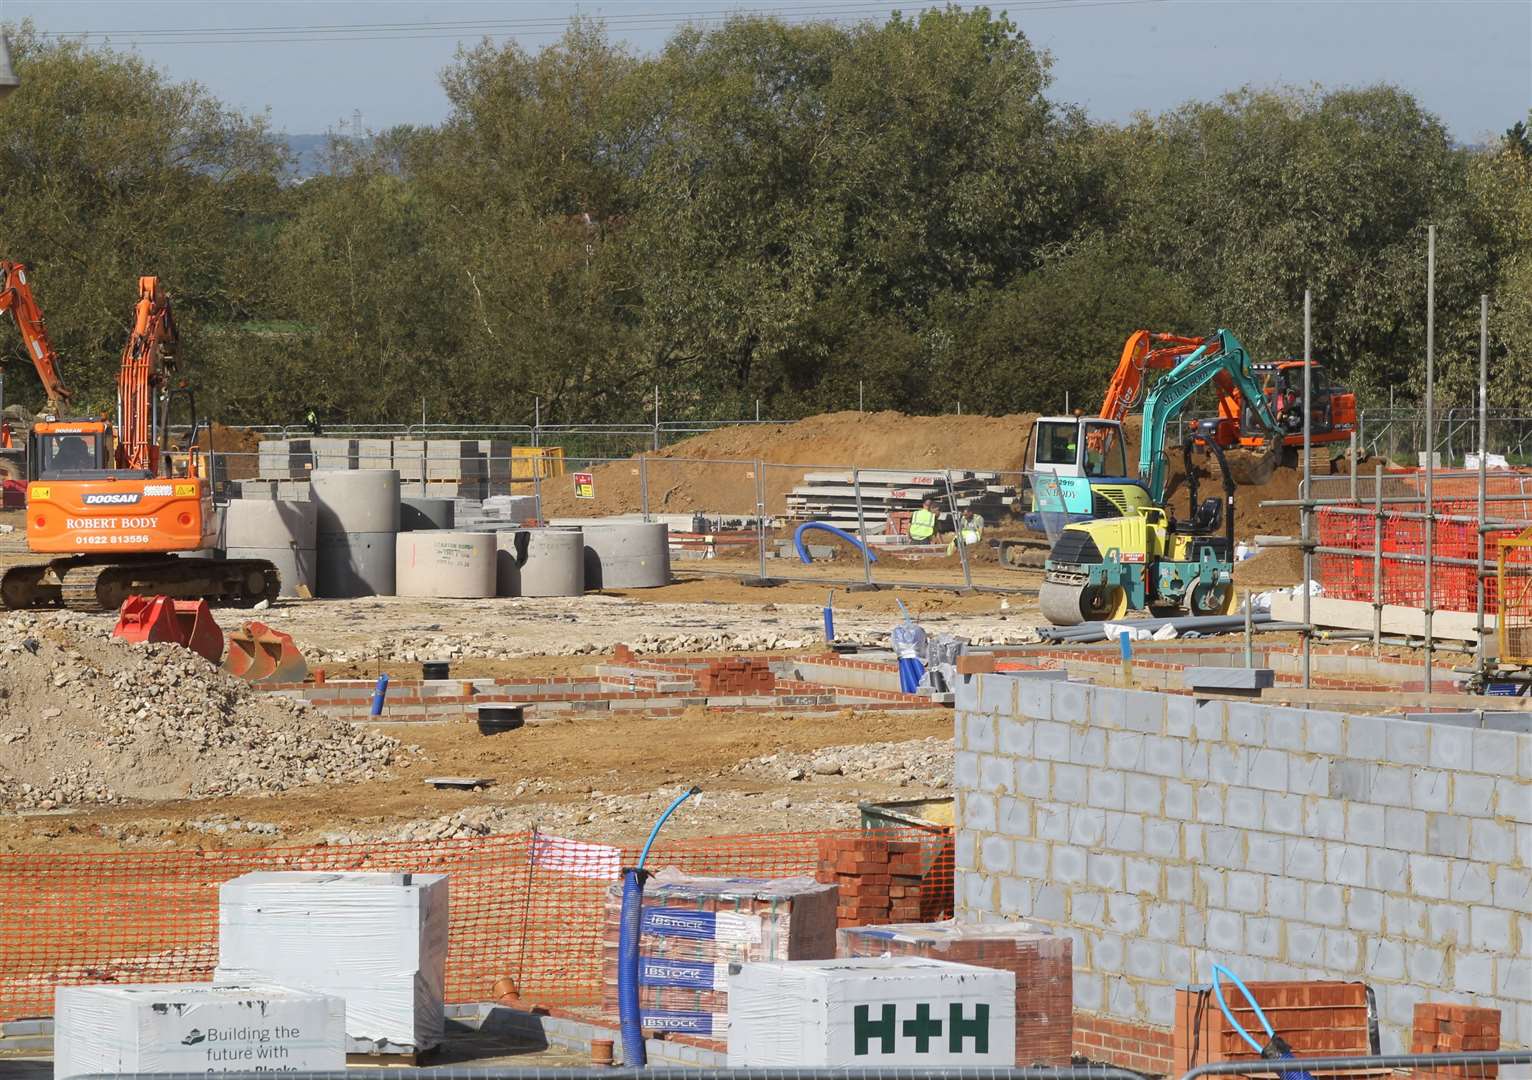 Homes being built on a floodplain to tackle a shortage of housing. Picture: John Westhrop